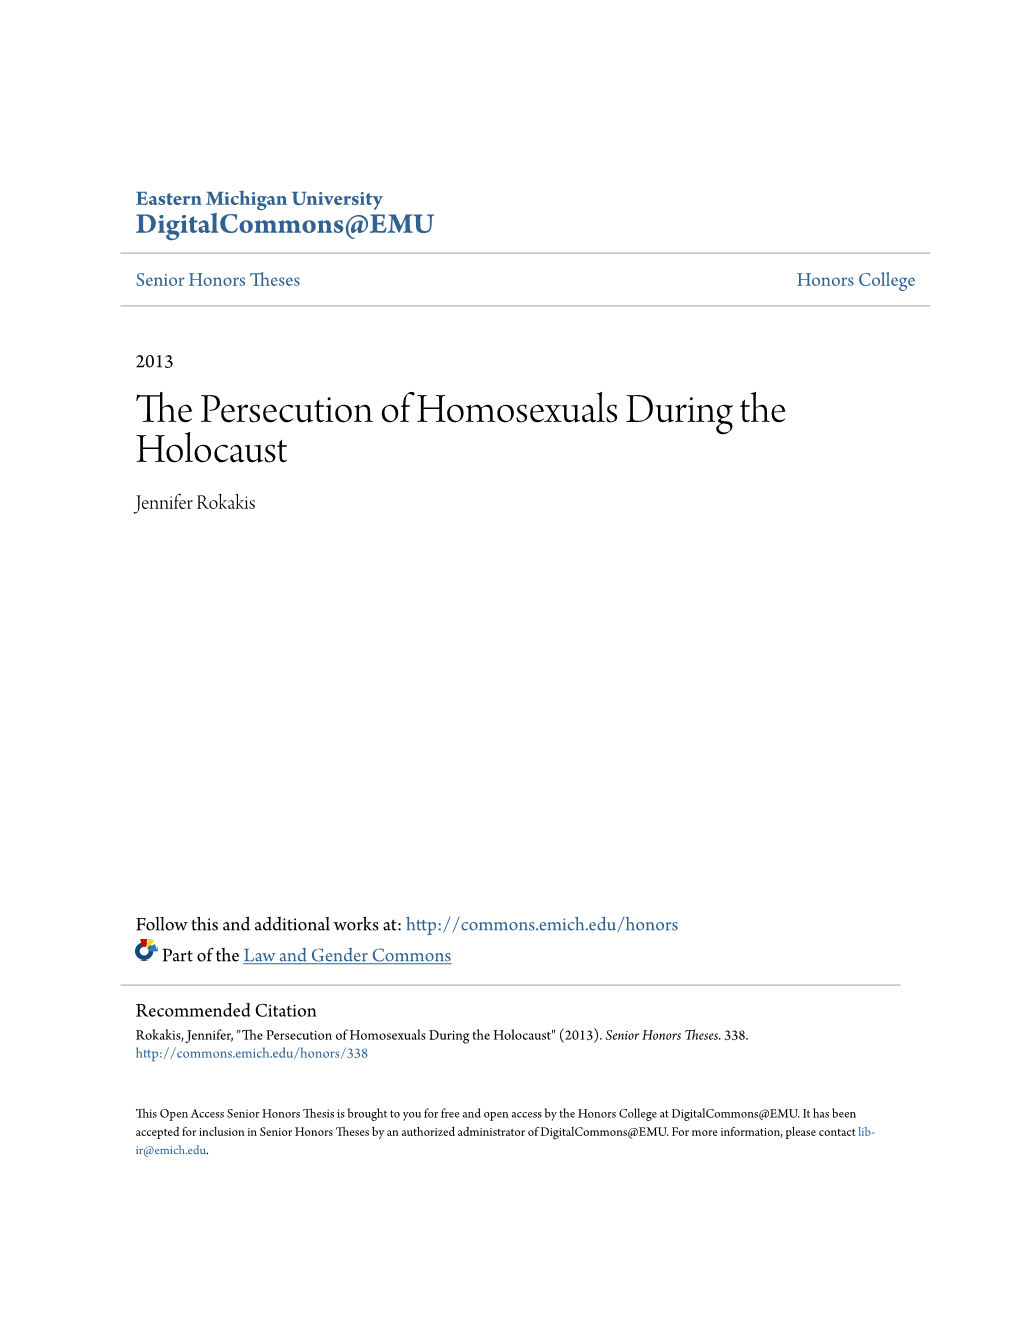 The Persecution of Homosexuals During the Holocaust